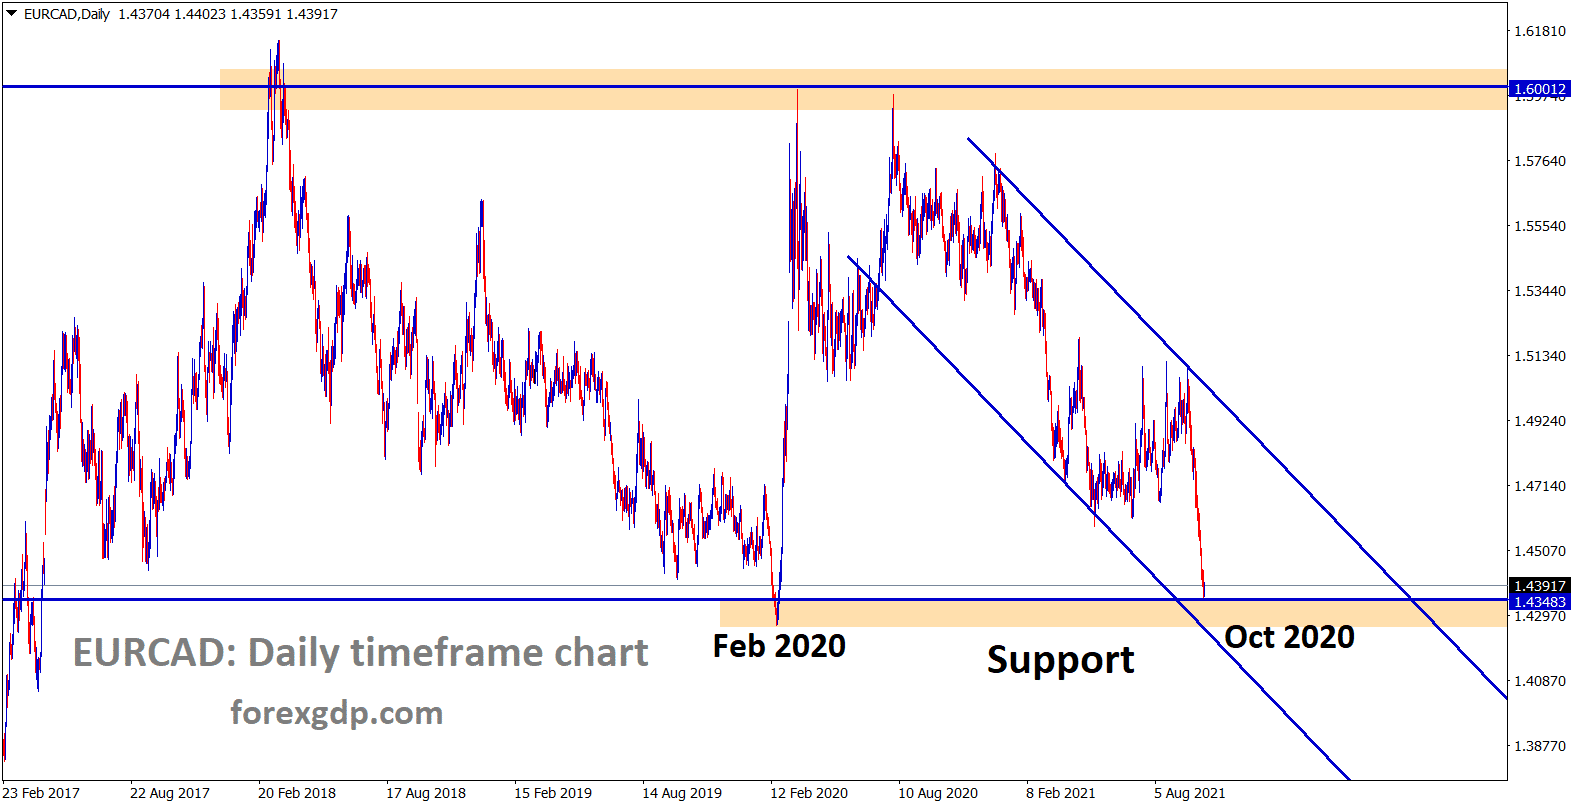 EURCAD is near to the major support area after a long time wait for reversal or breakout